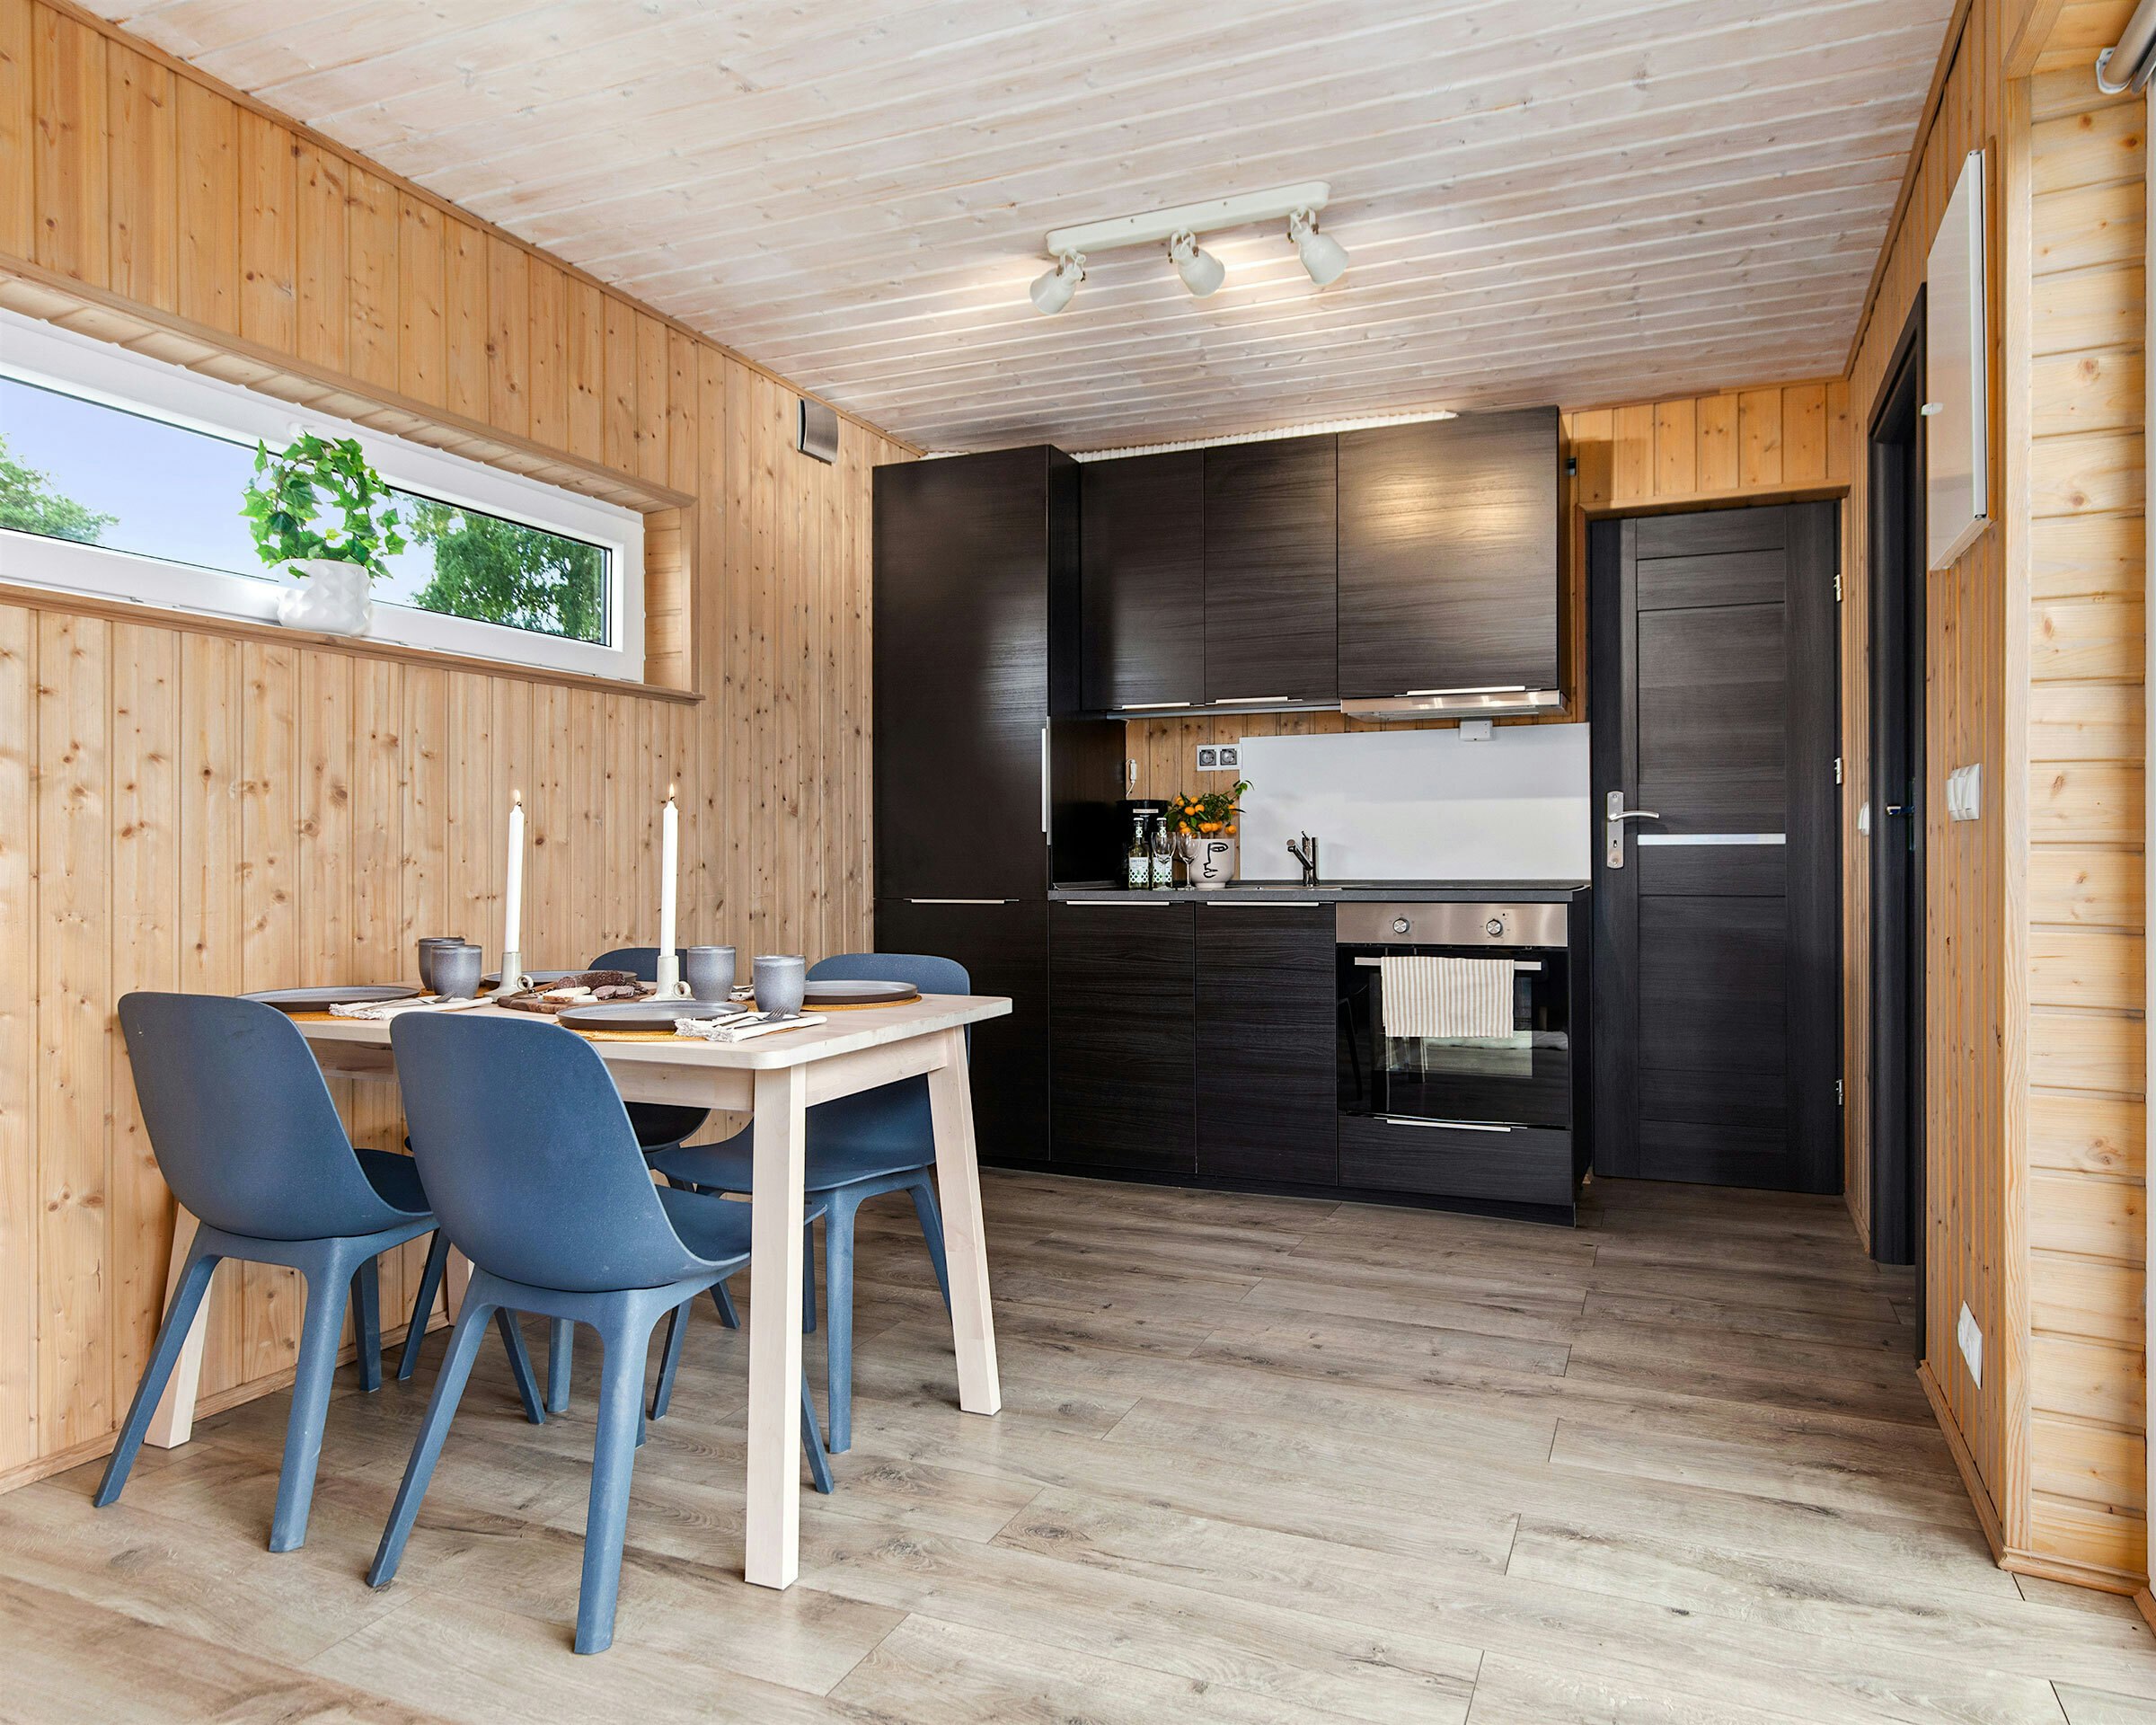 Modern room with covered dining table, kitchen with fridge and cooker in the background. Photo